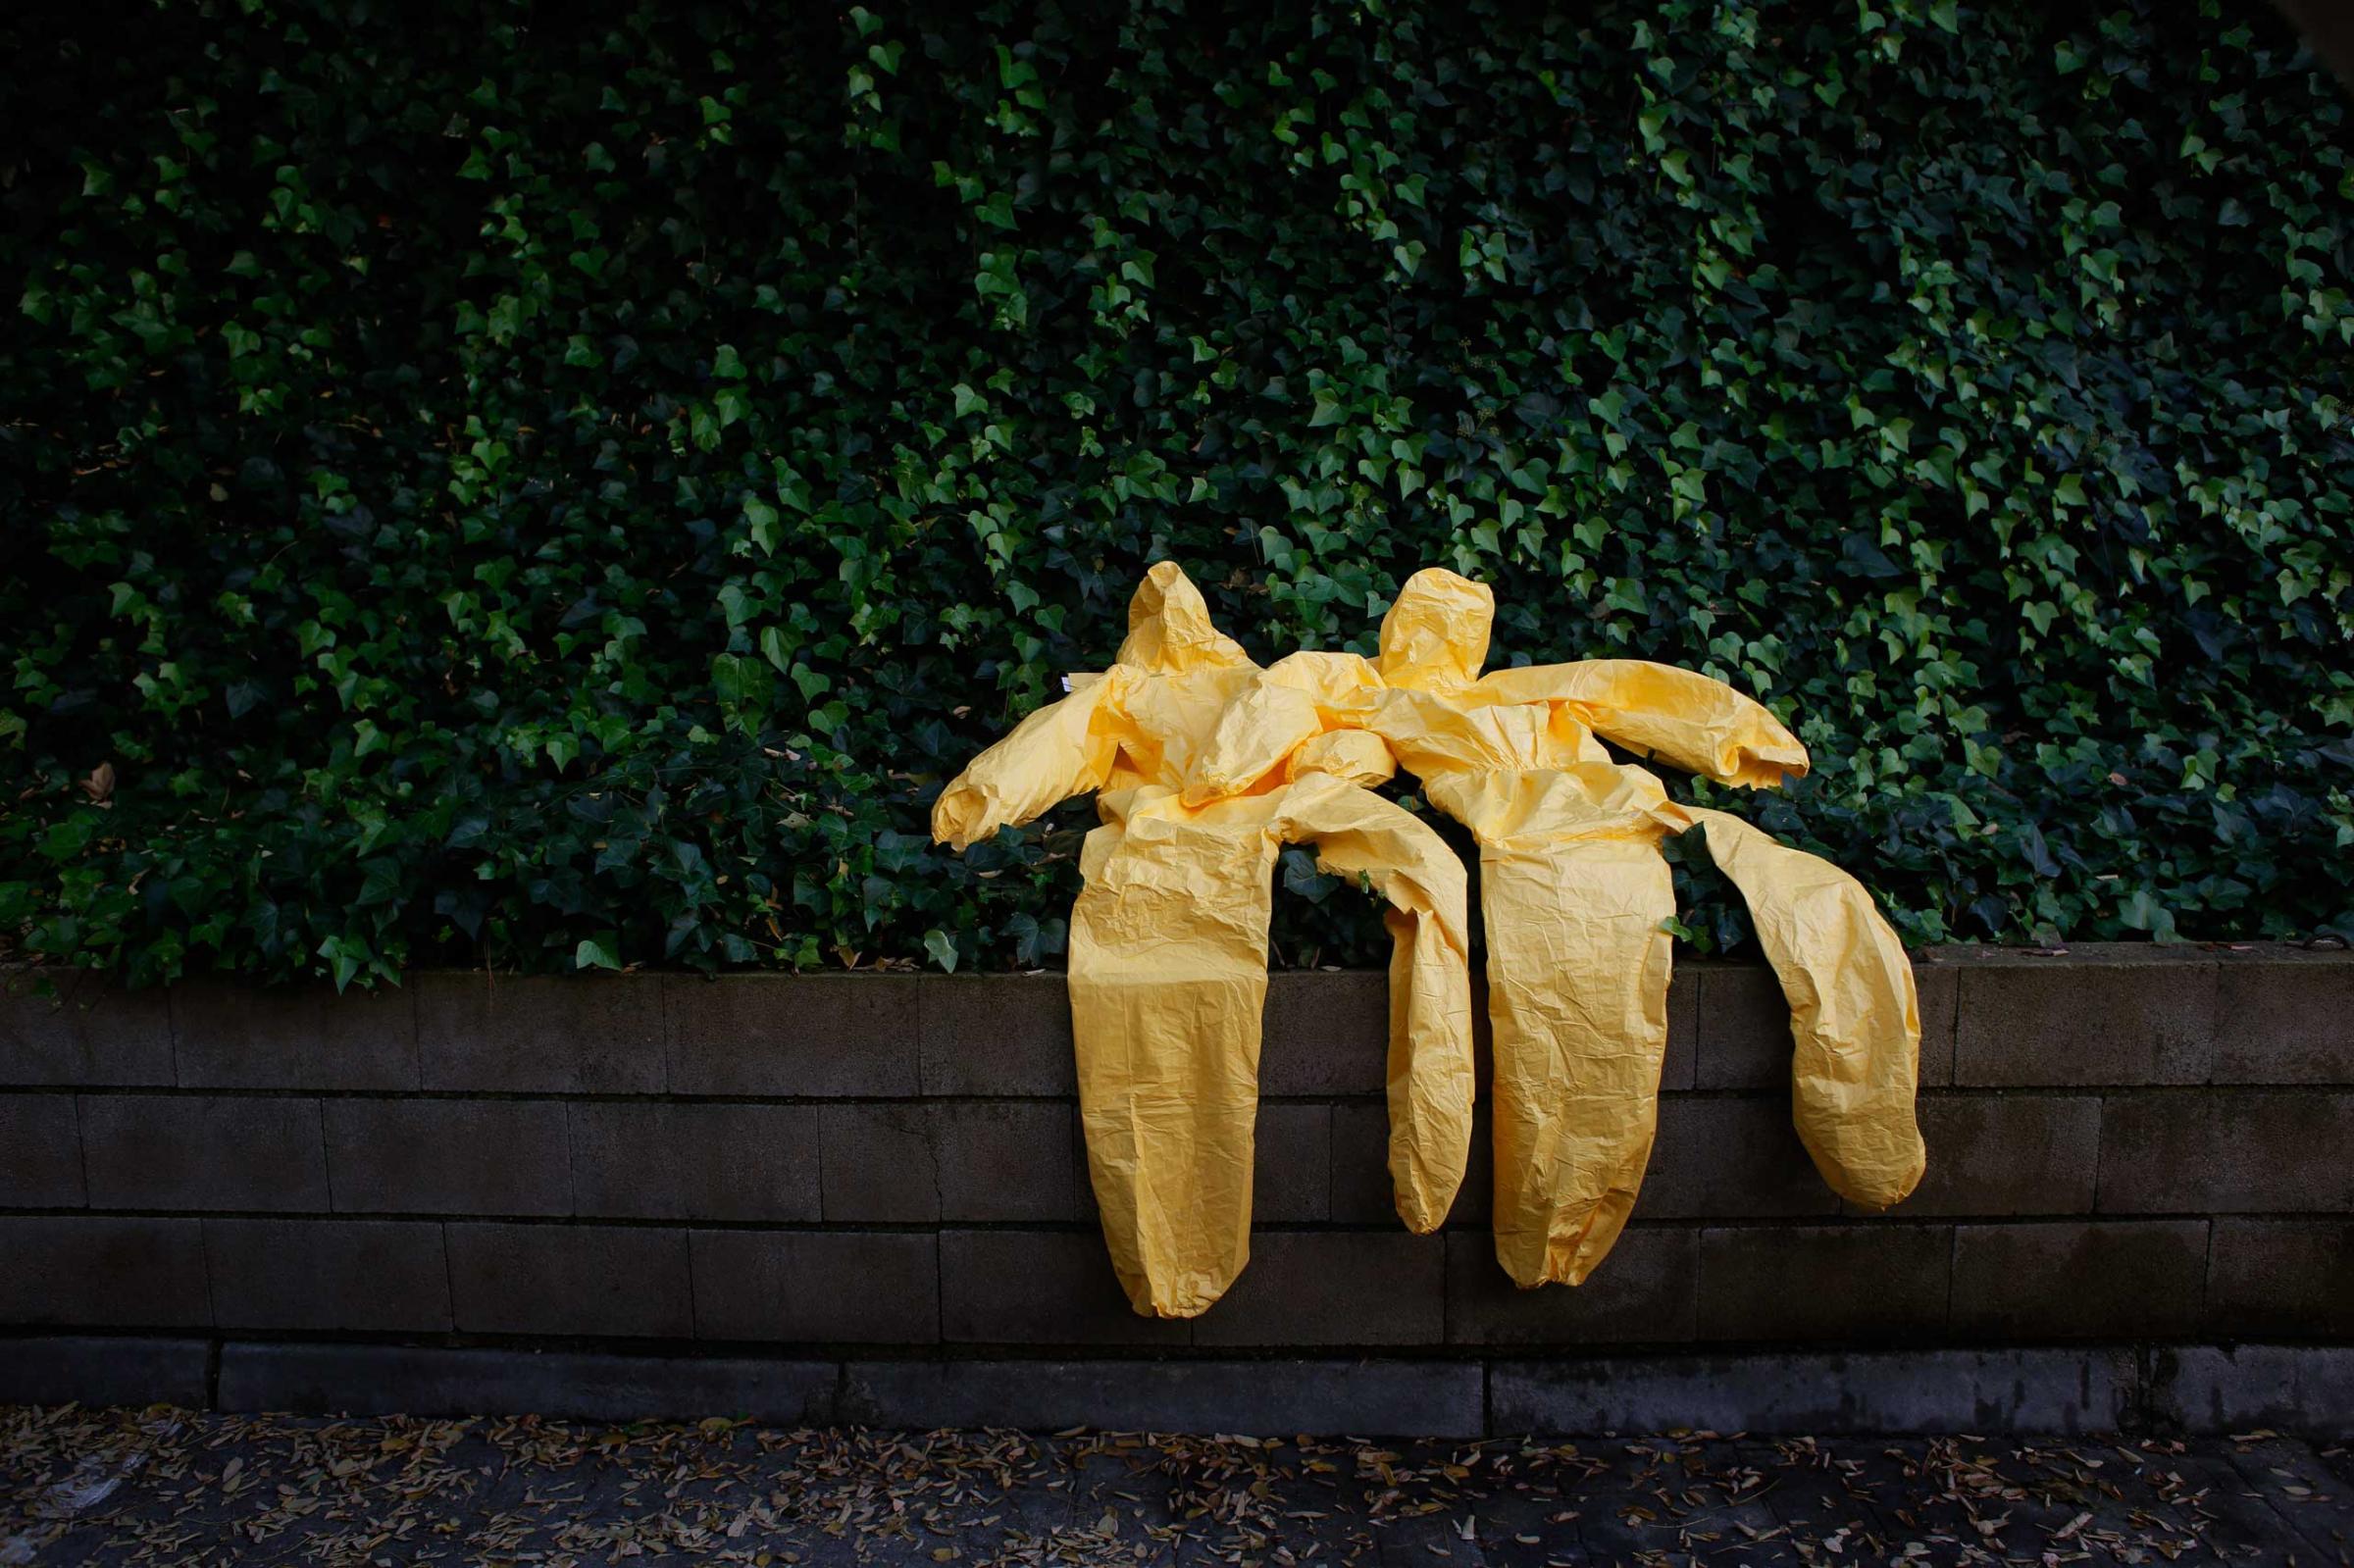 Protective suits are left to dry after an Ebola training session held by Spain's Red Cross in Madrid